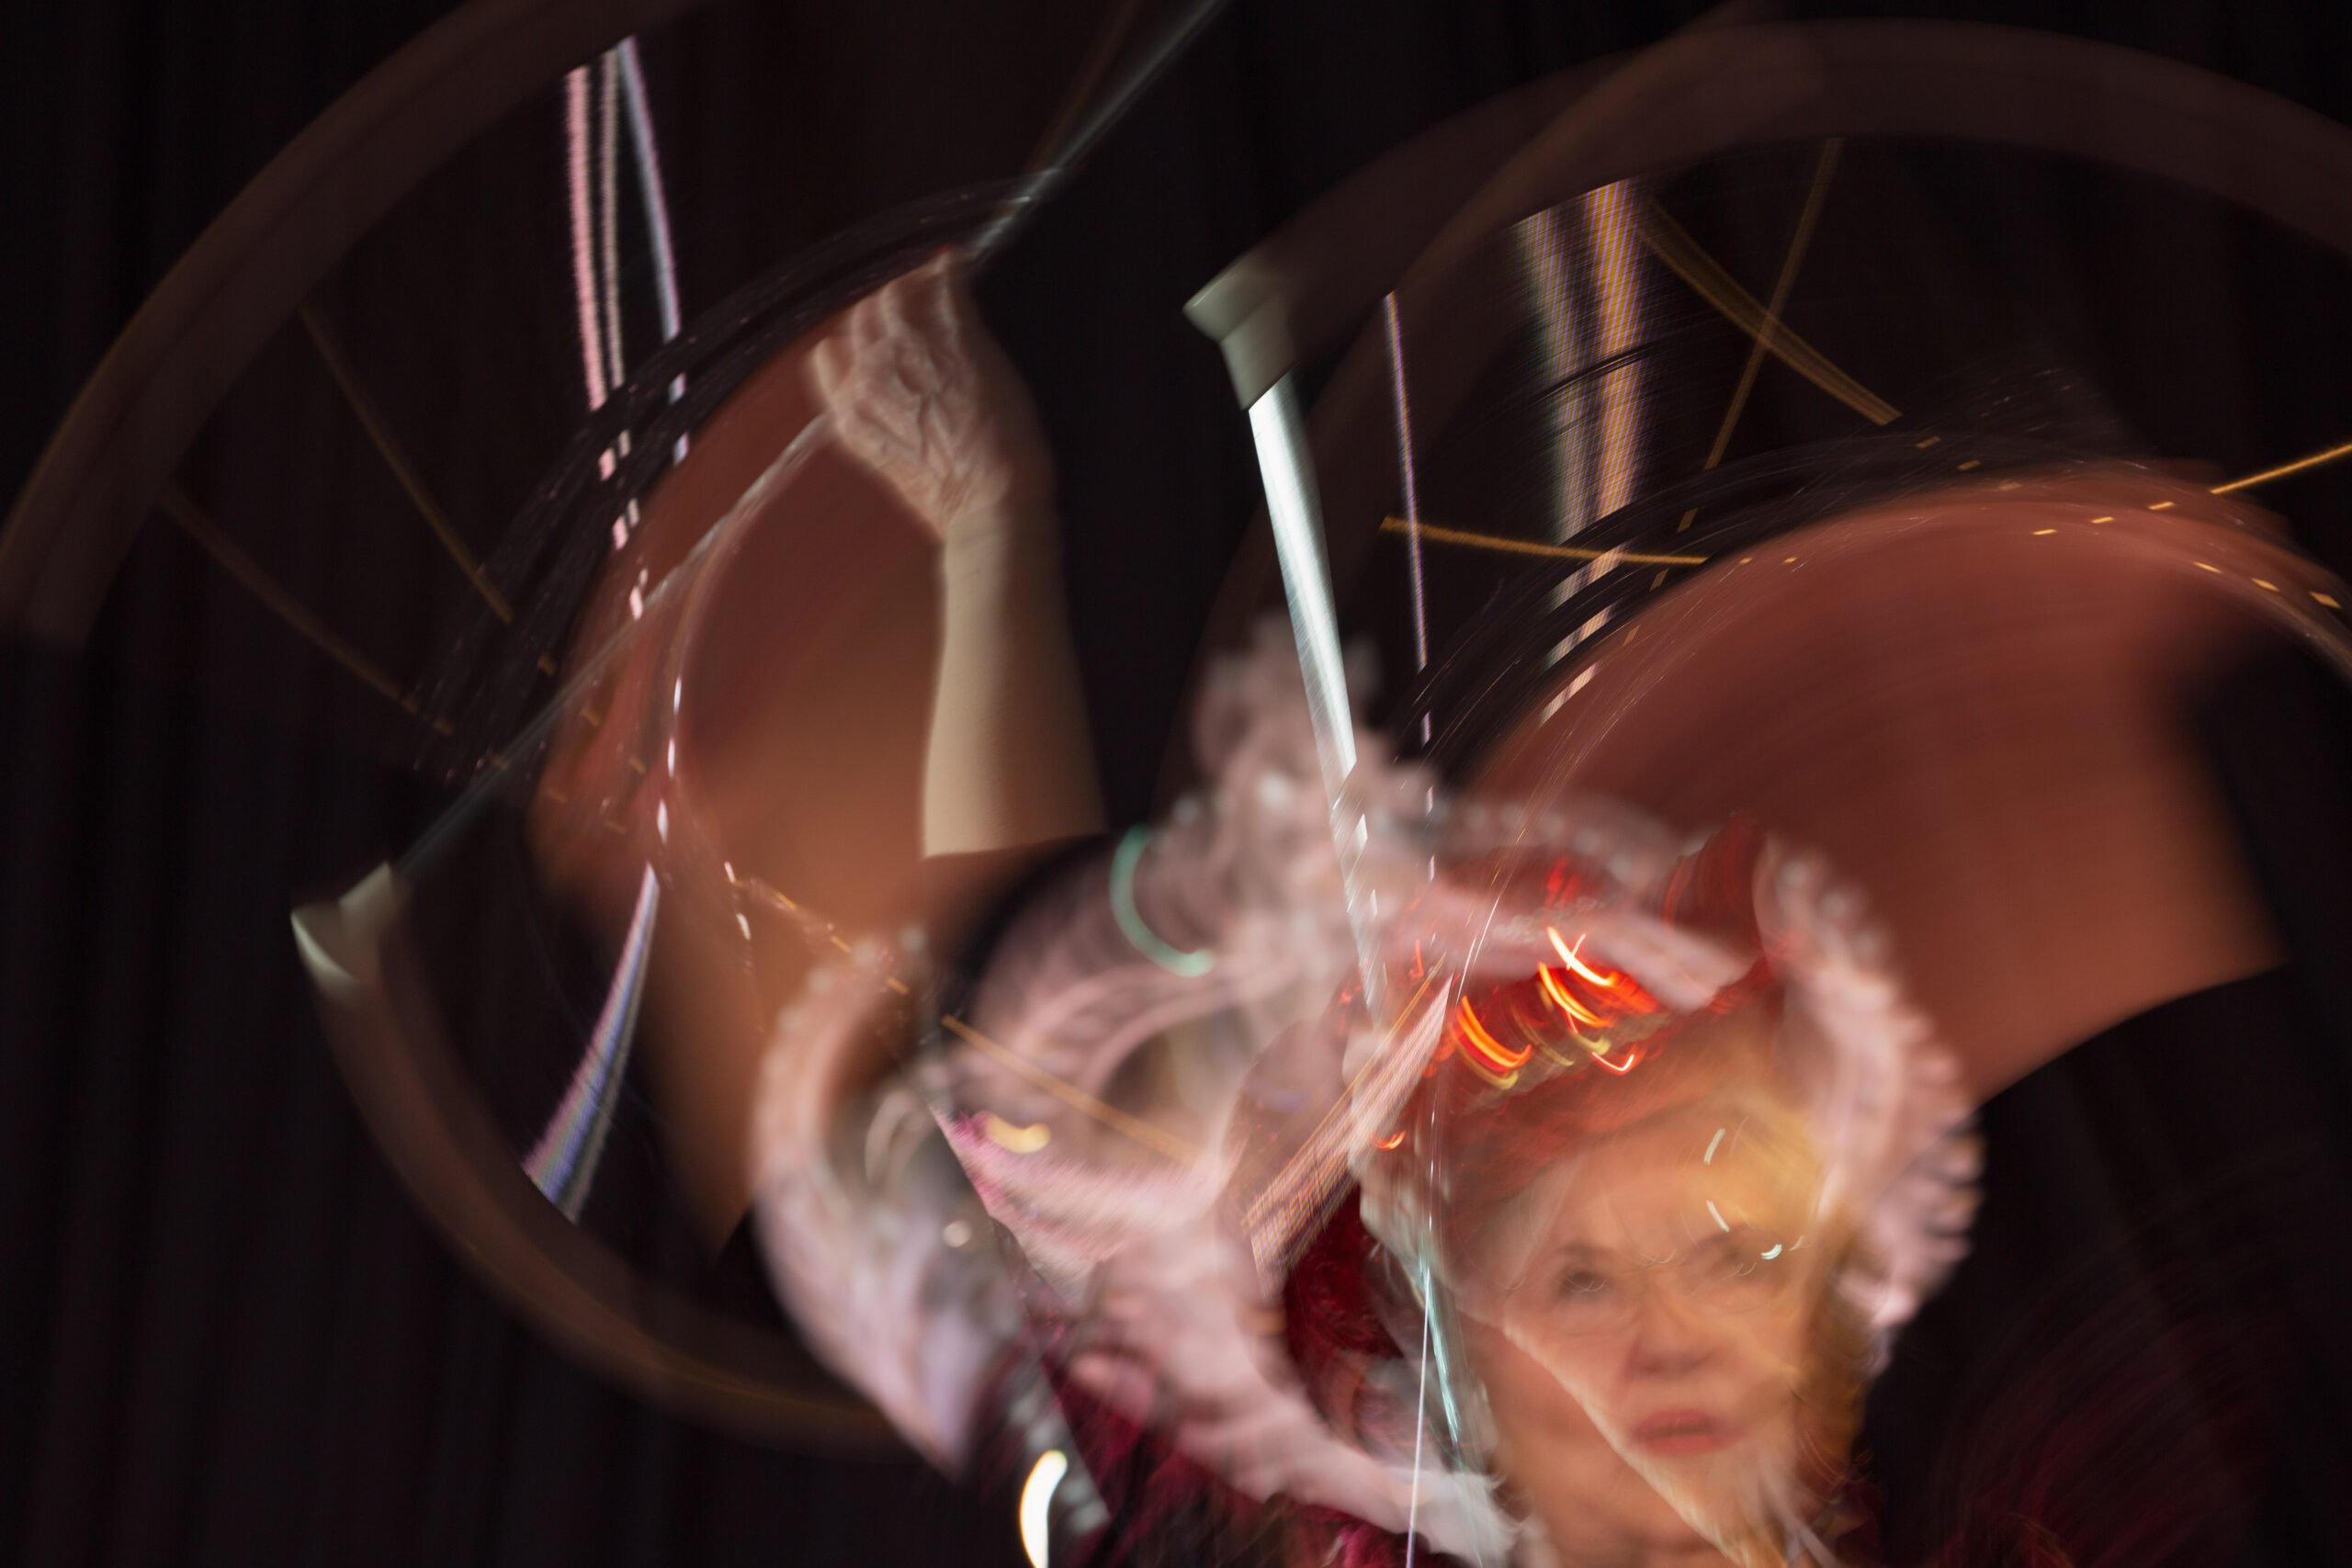 A multiple exposure photo showing an older white woman twirling a baton.